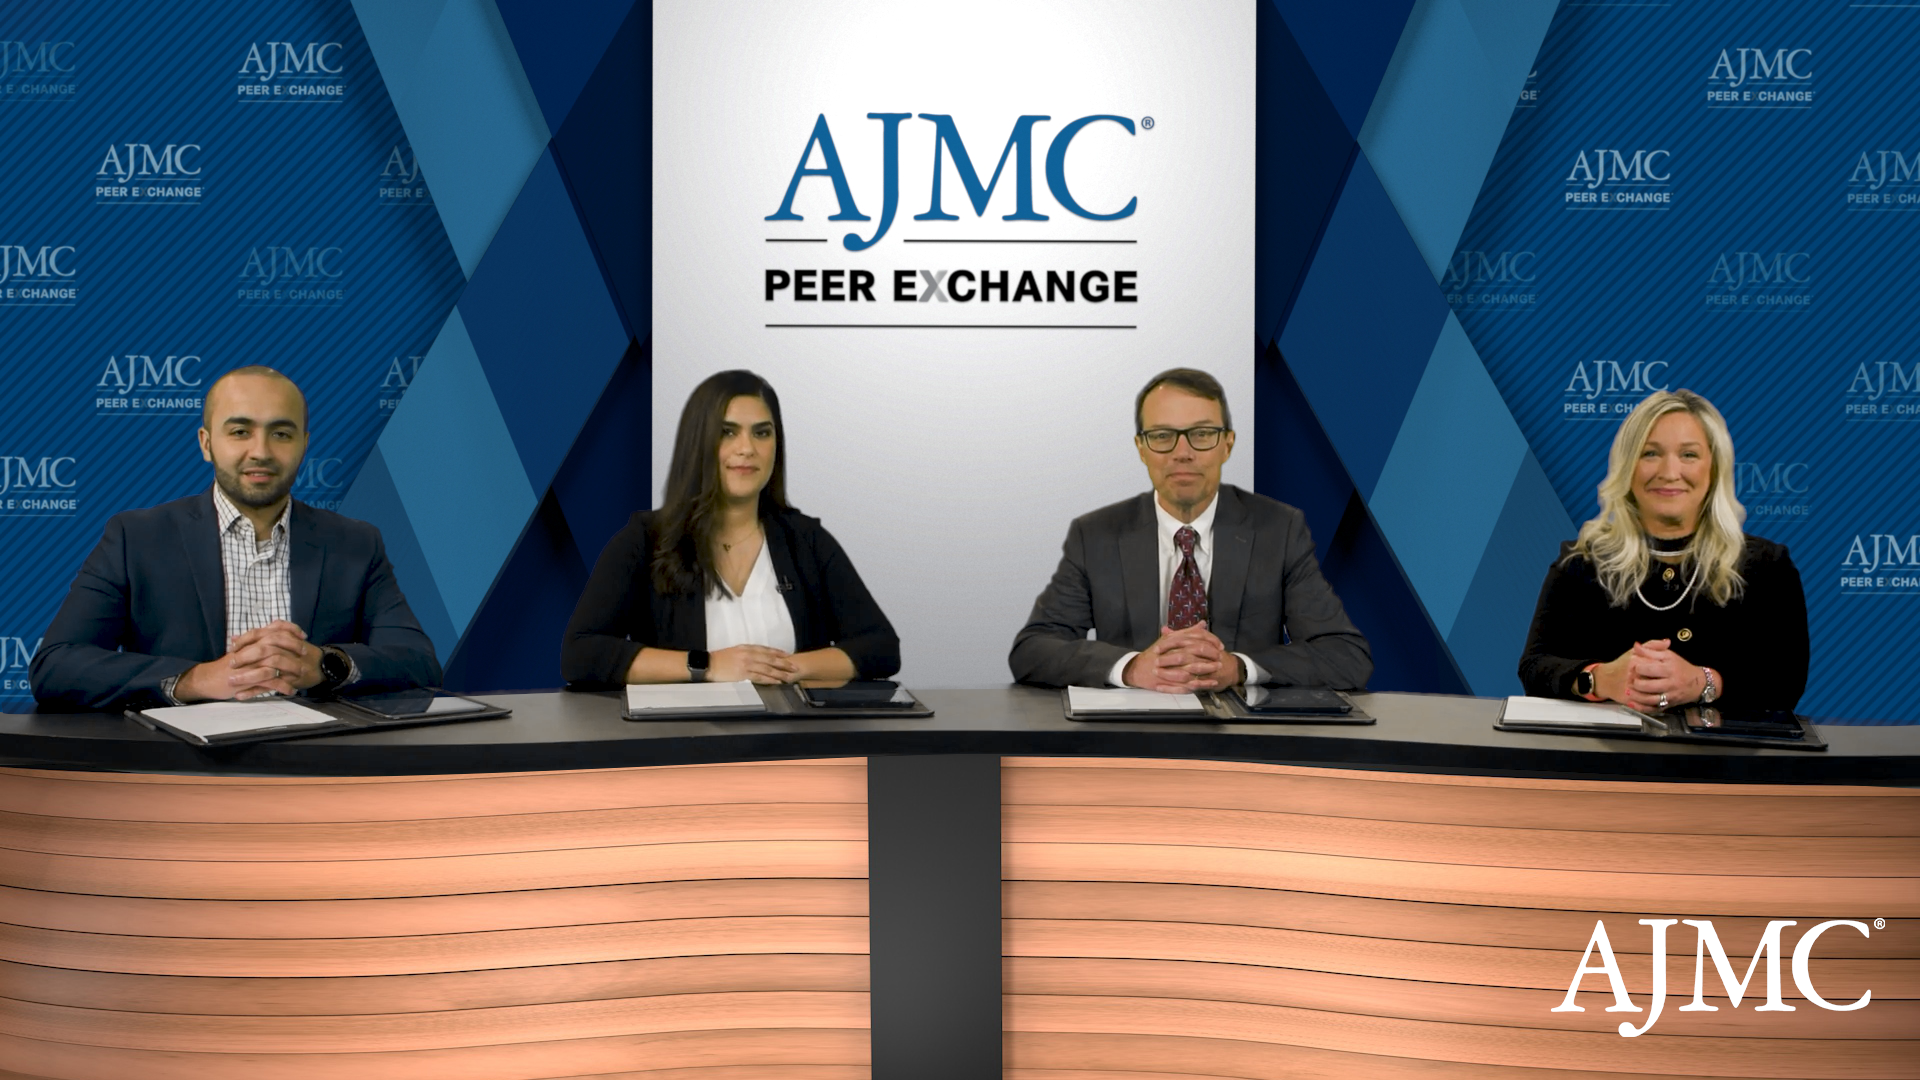 Treatment with Bispecifics in Relapsed-Refractory Multiple Myeloma